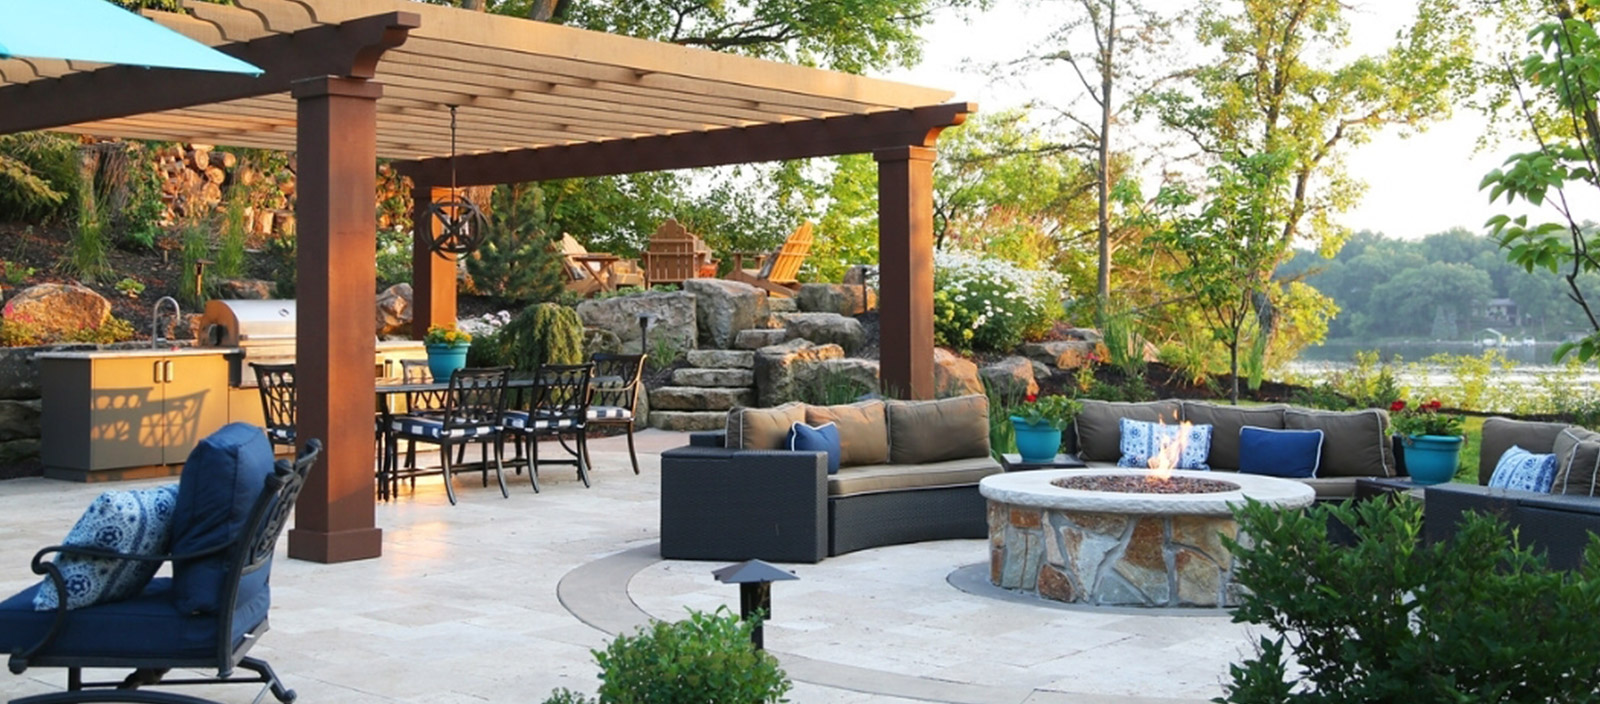 Outdoor kitchen and living areas